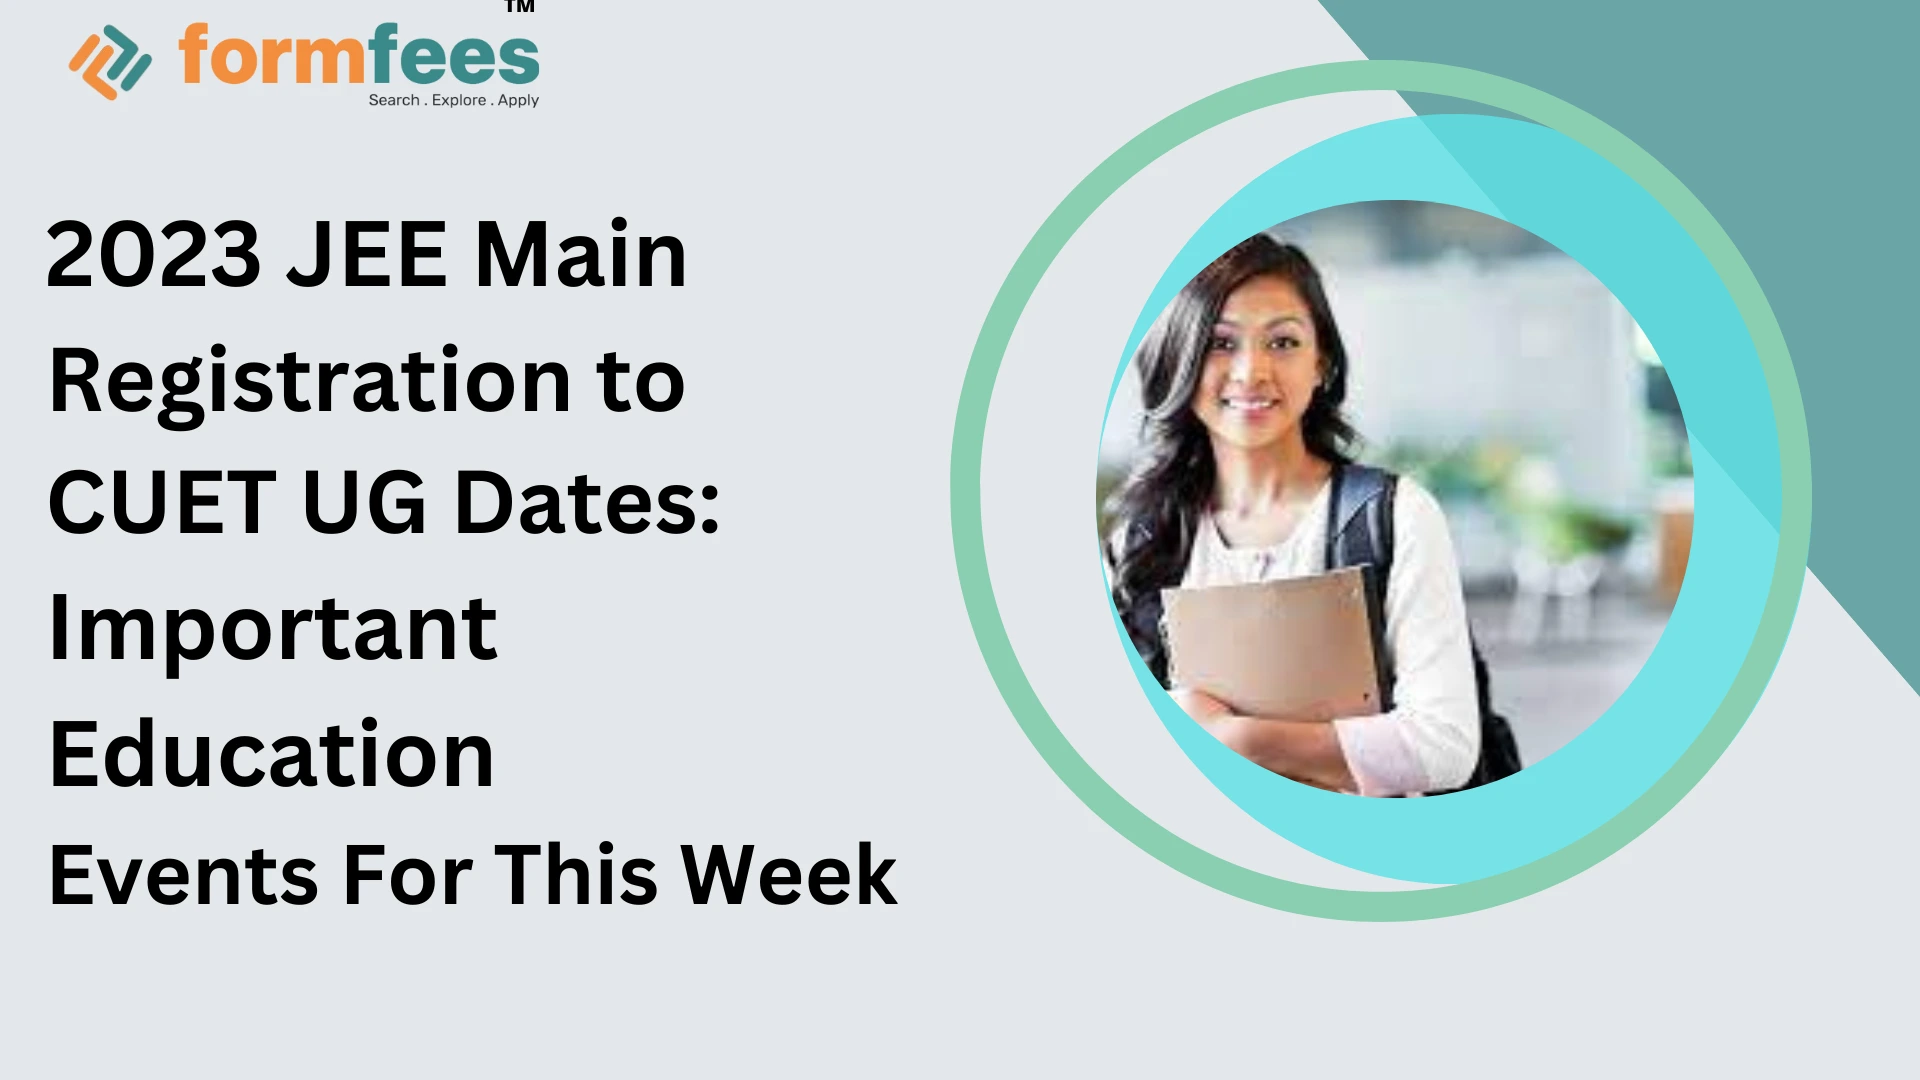 2023 JEE Main Registration to CUET UG Dates Important Education Events For This Week